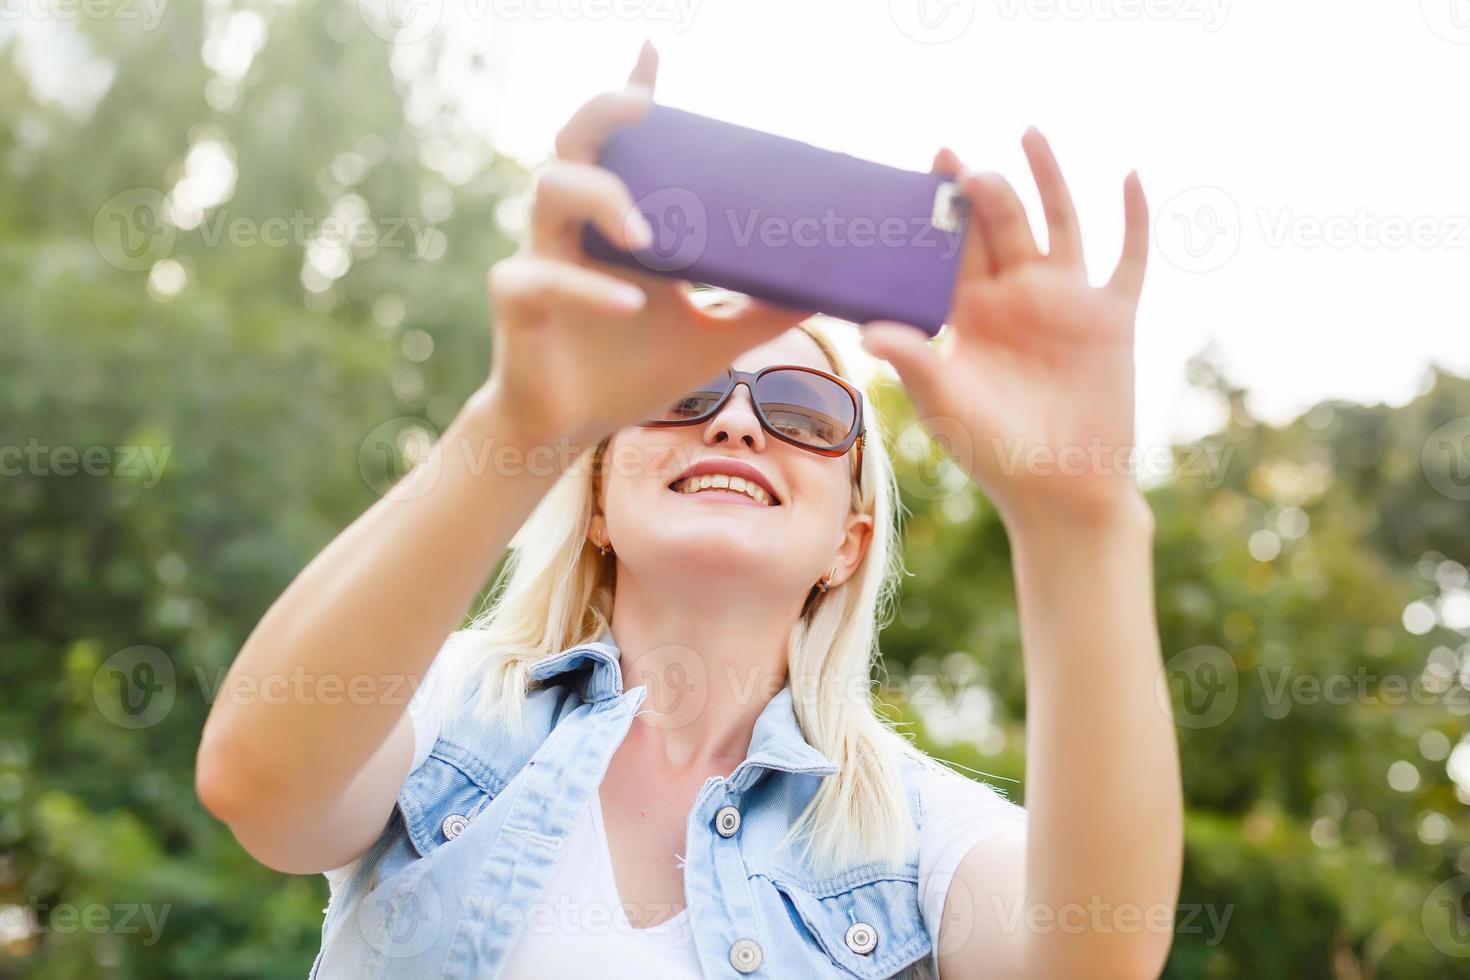 Smiling woman with a smartphone photo